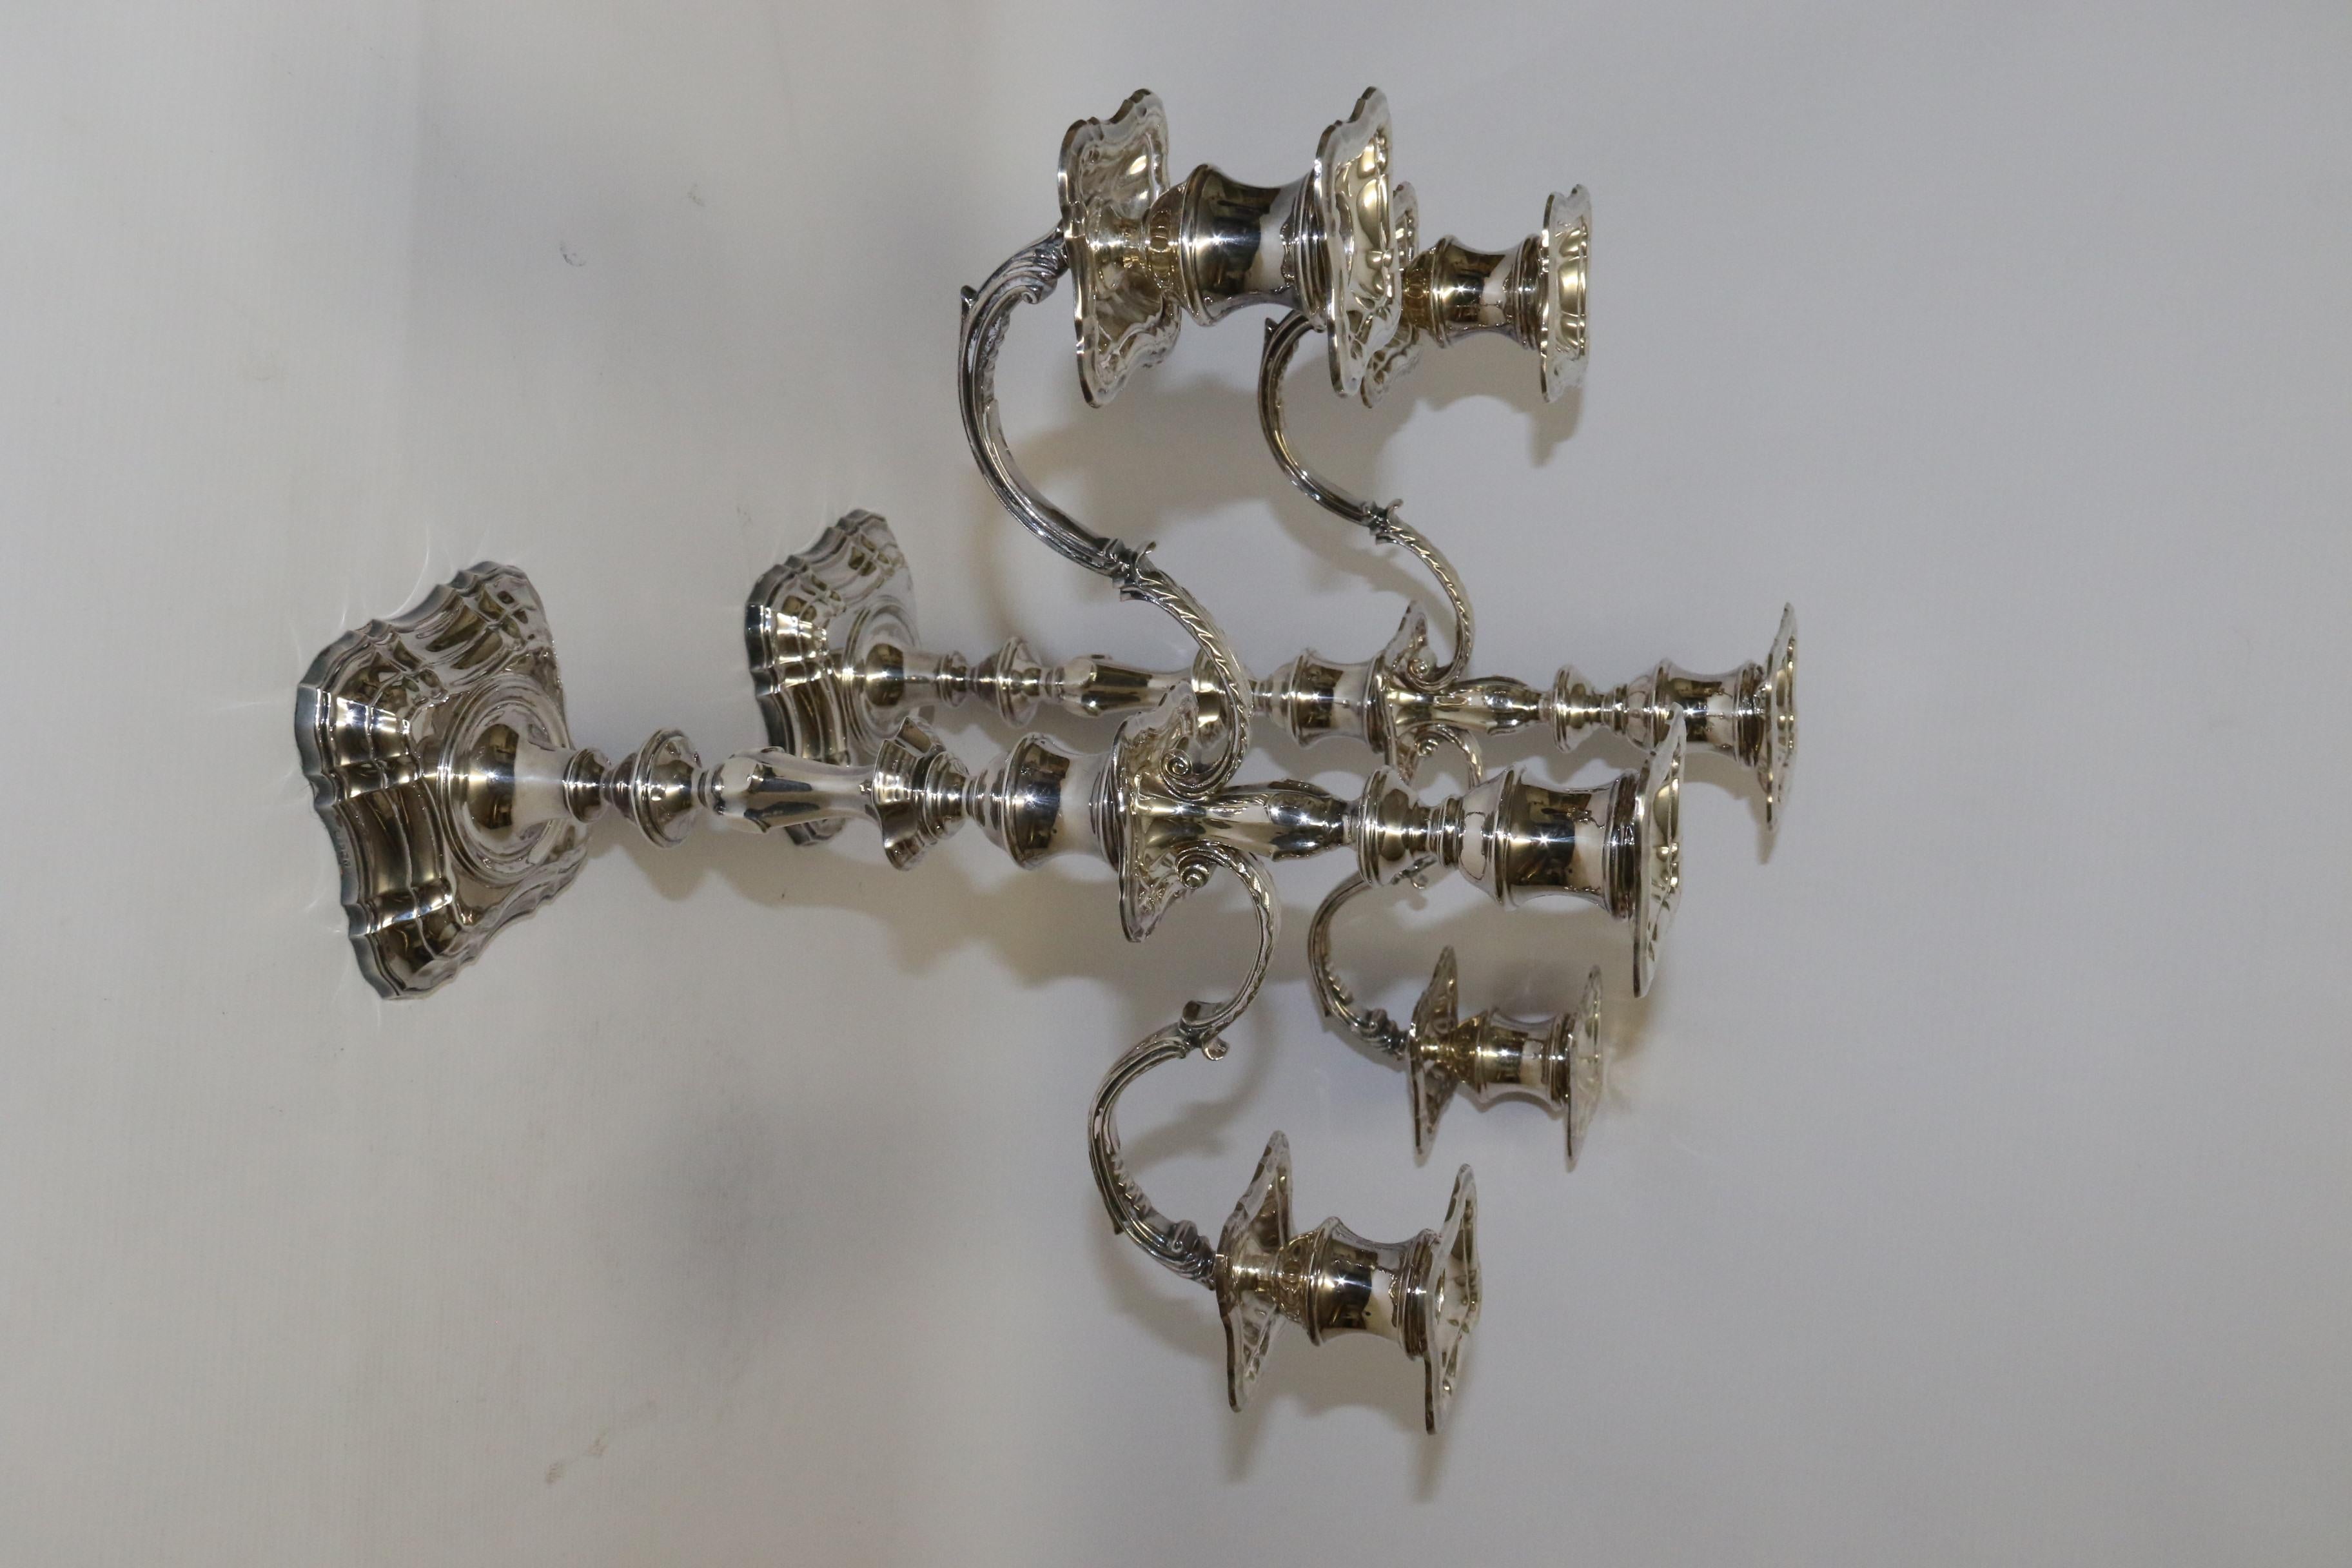 This impressive pair of fine quality silver candelabra are beautifully made in an early Georgian style. They were manufactured in Sheffield by the renowned silversmith Roberts and Belk who was established in 1892 and well known for making a large